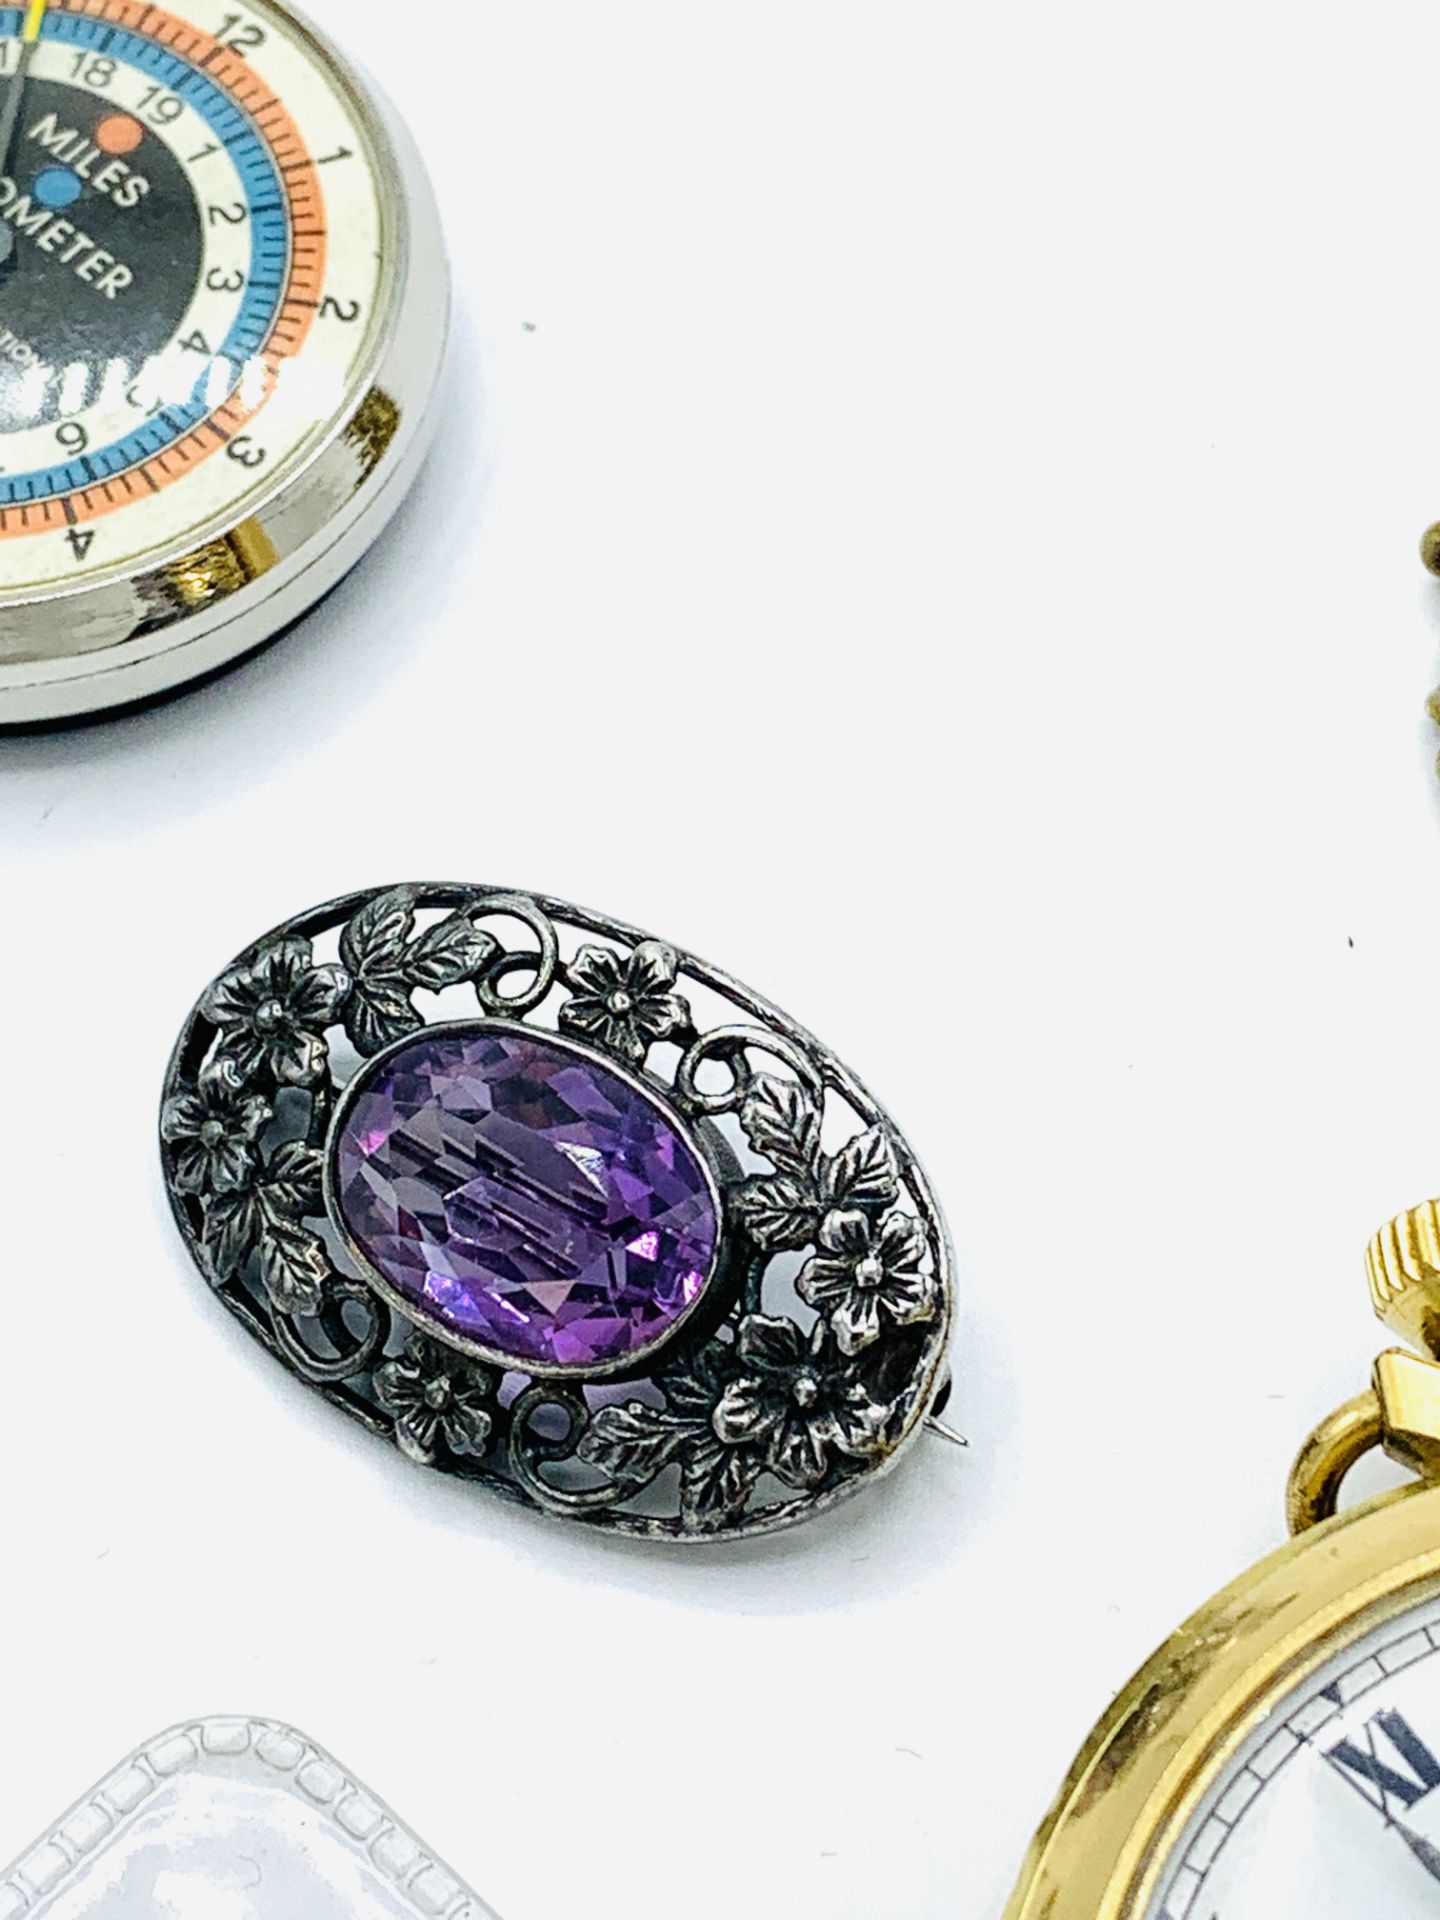 Everite lady's wrist watch; Smiths pocket watch; pedometer; brooch and two coins. - Image 3 of 5